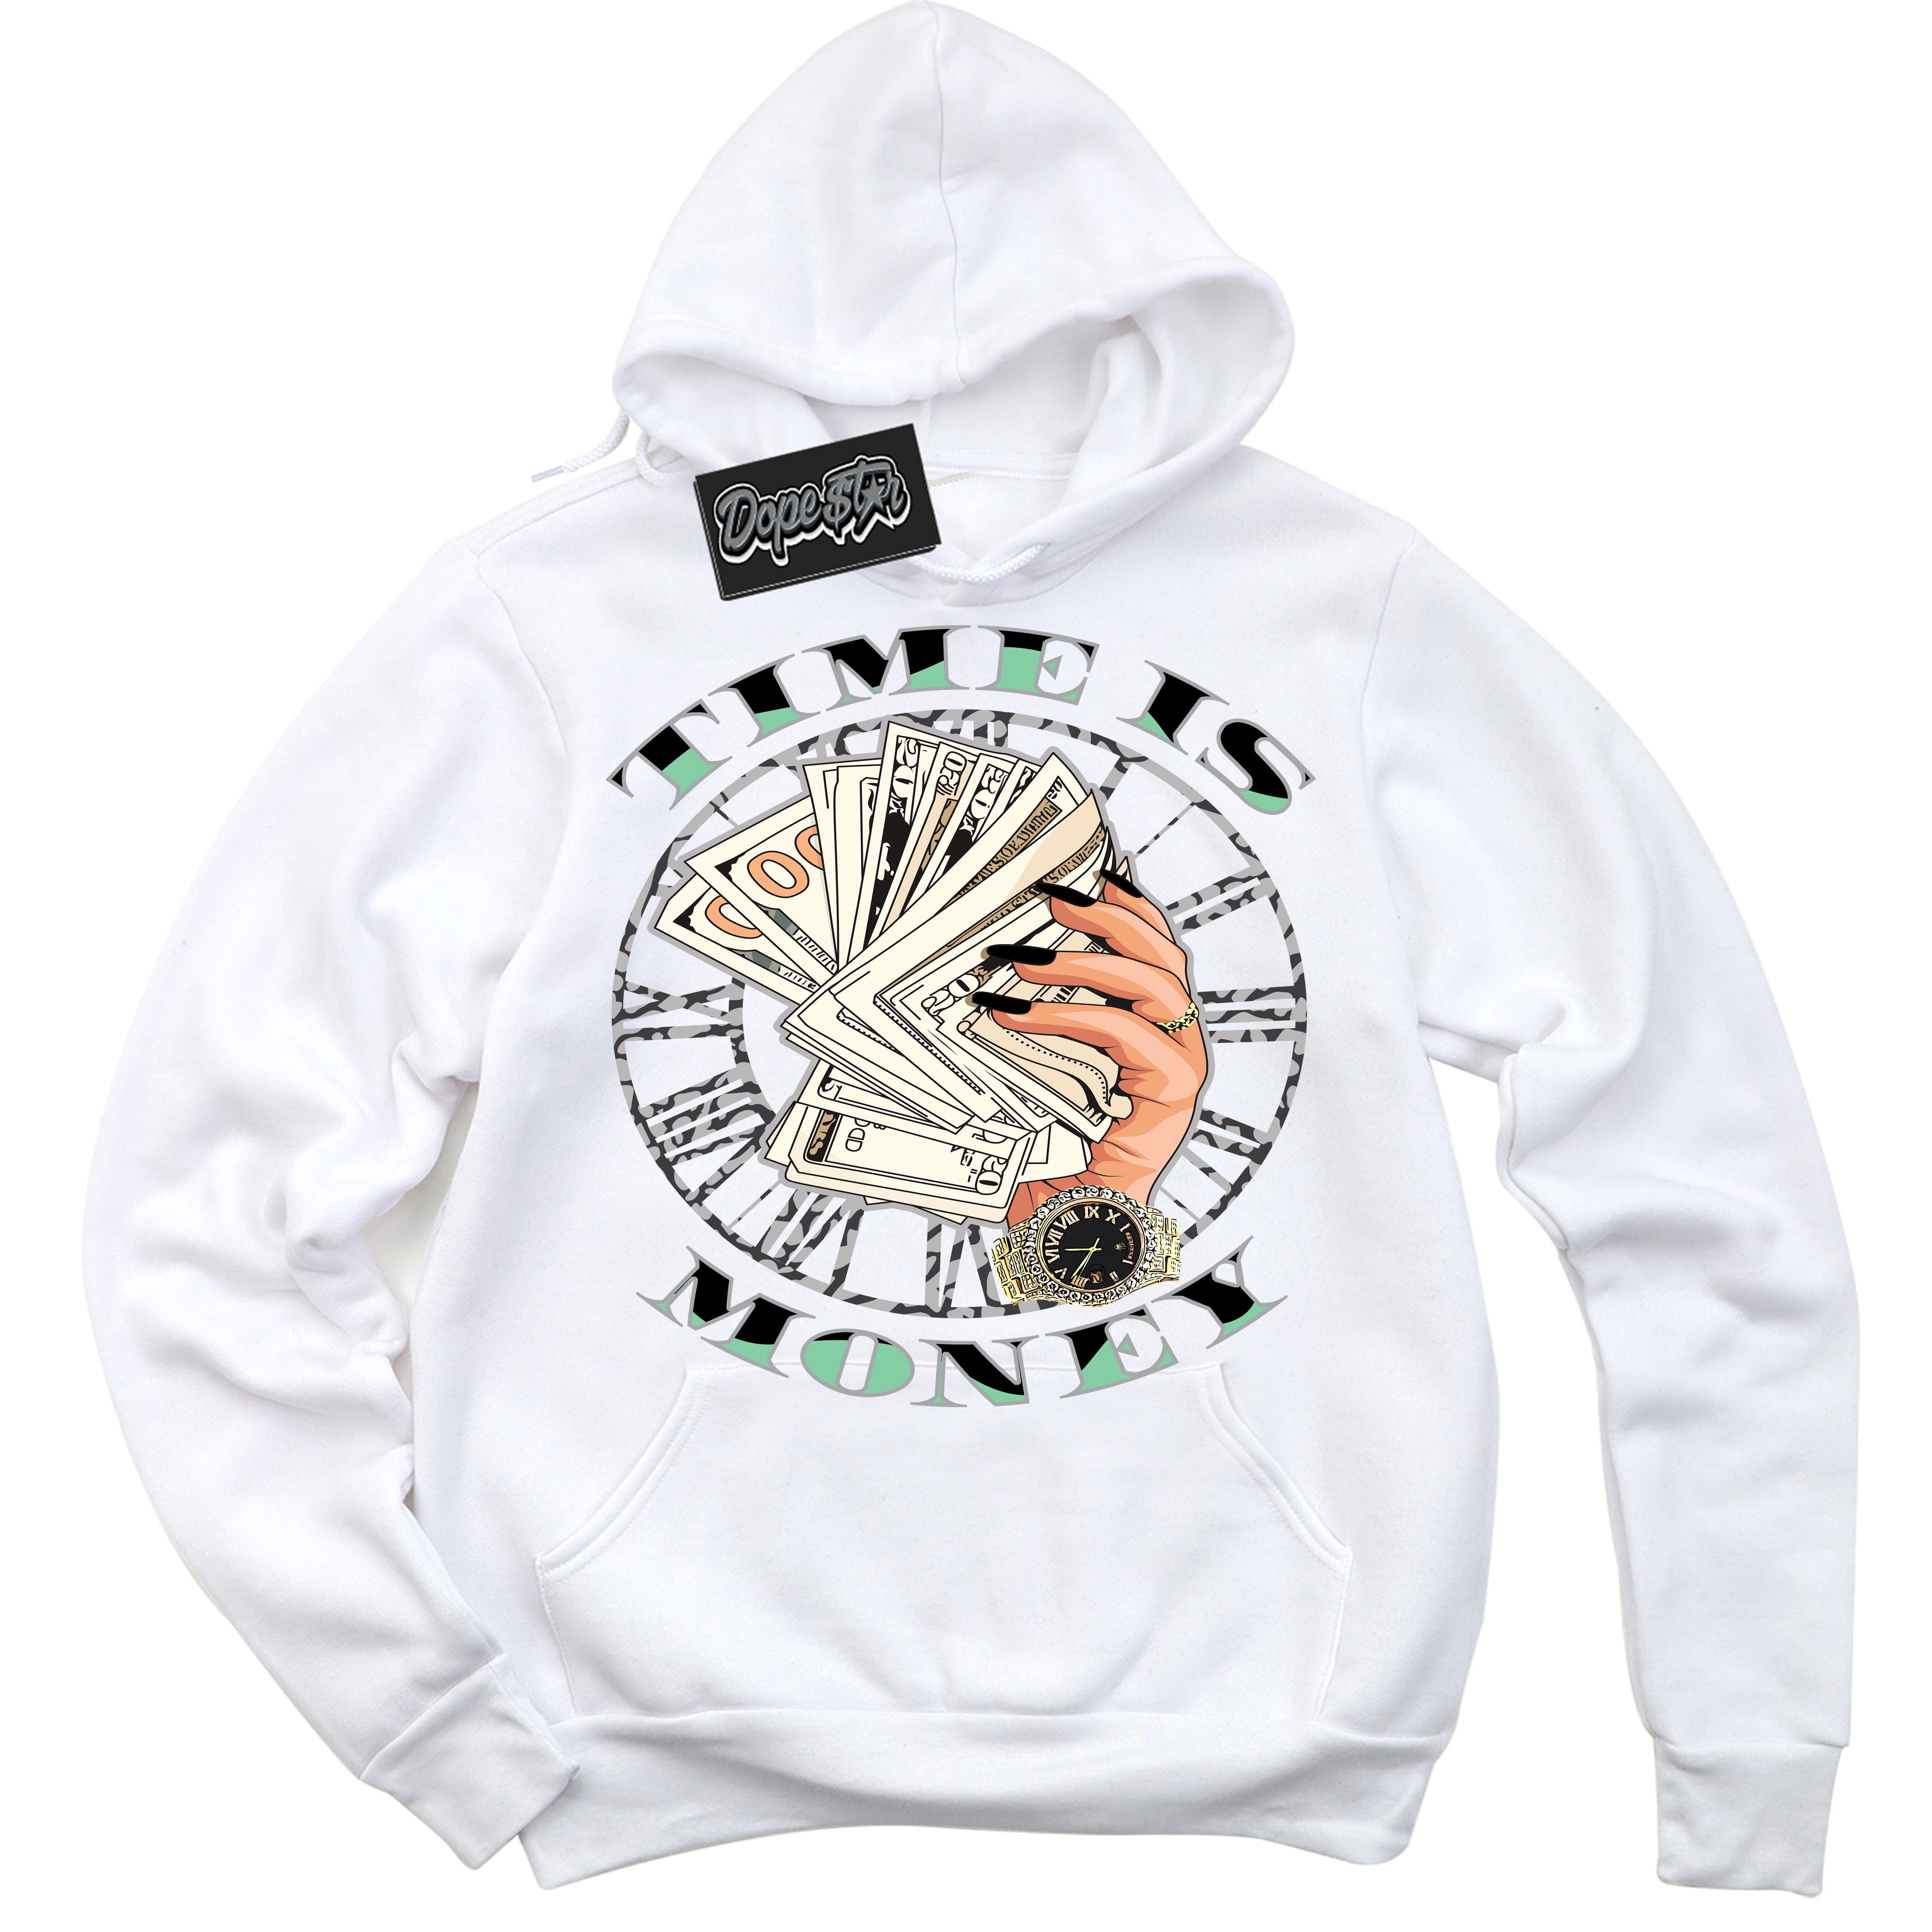 Cool White Graphic DopeStar Hoodie with “ Time Is Money “ print, that perfectly matches Green Glow 3s sneakers